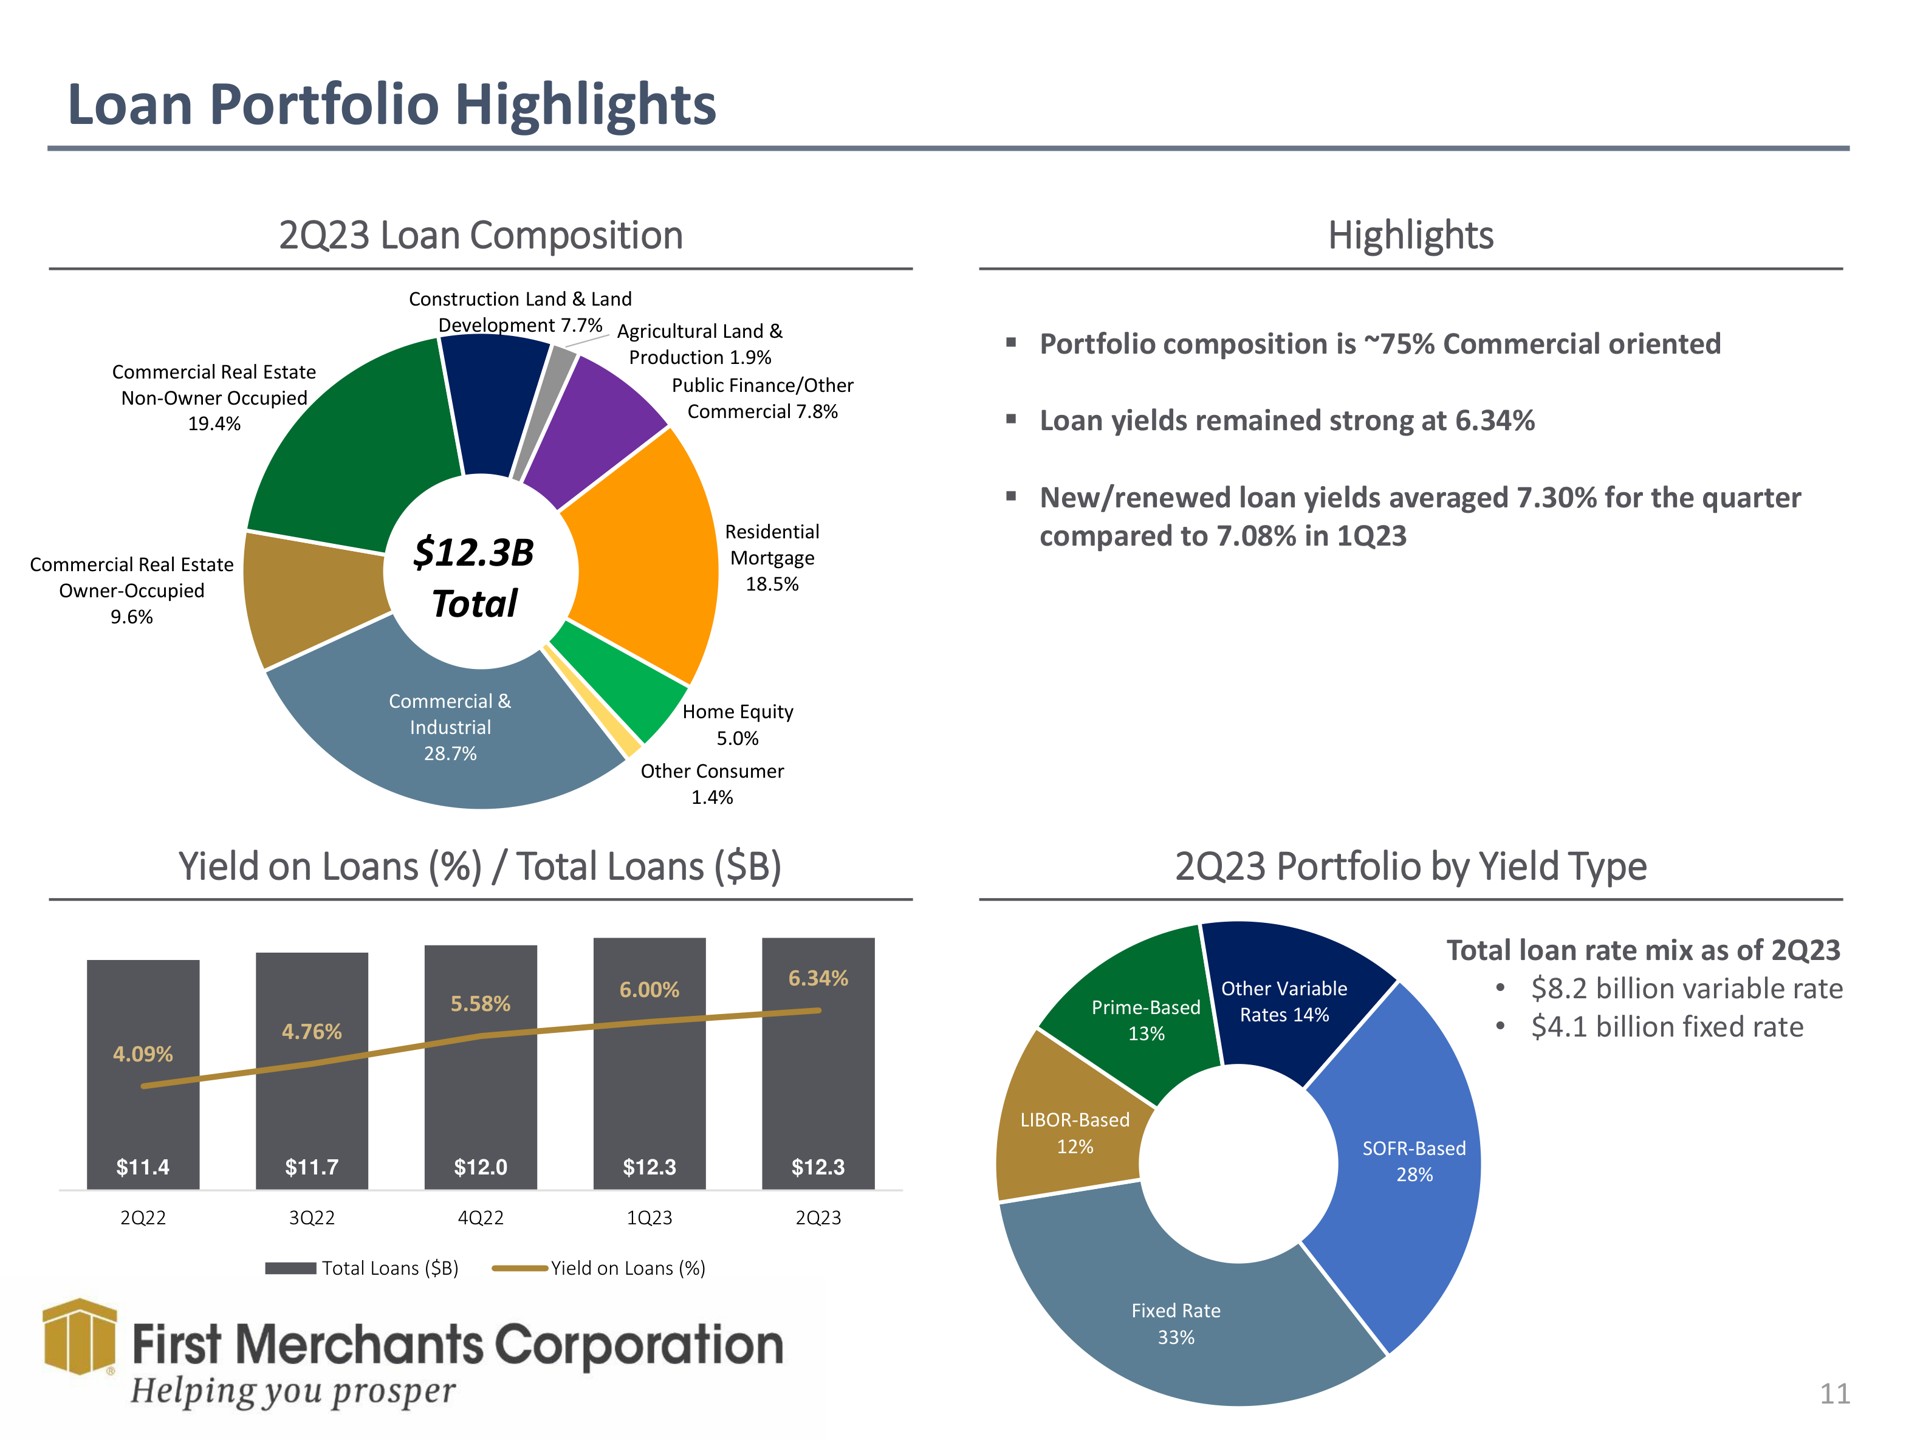 loan portfolio highlights composition yield on loans total loans by yield type first merchants corporation | First Merchants